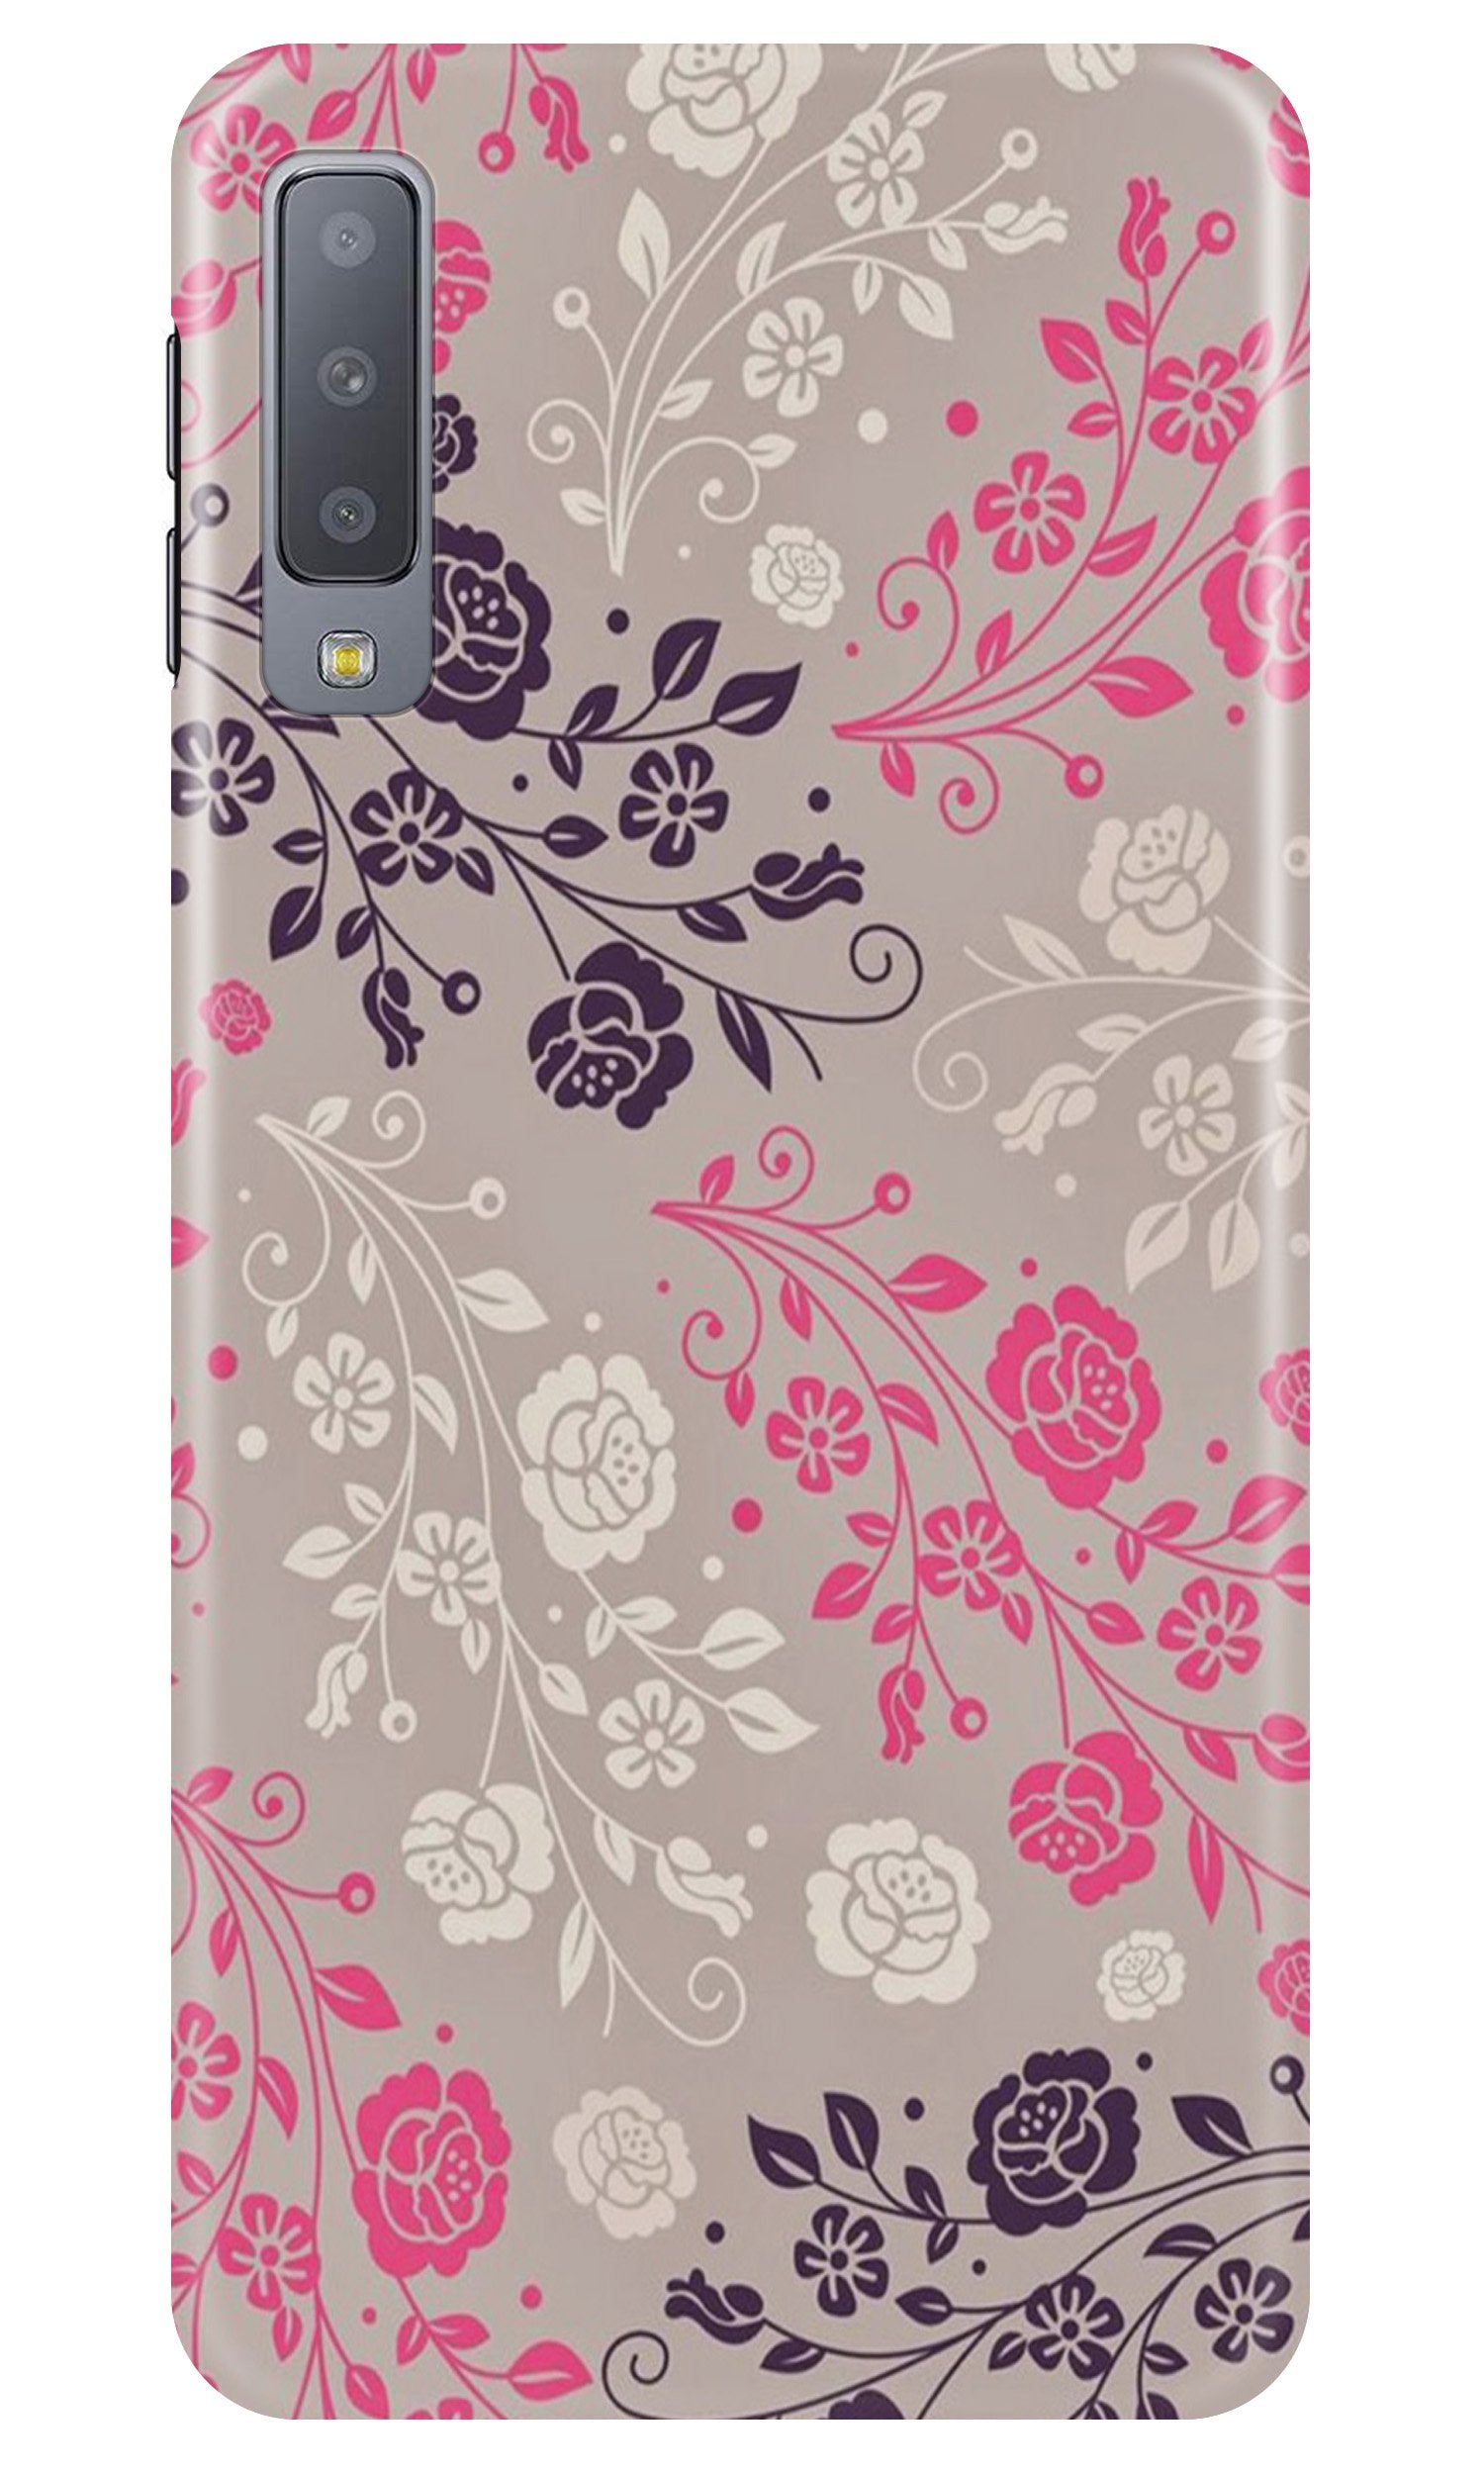 Pattern2 Case for Samung Galaxy A70s